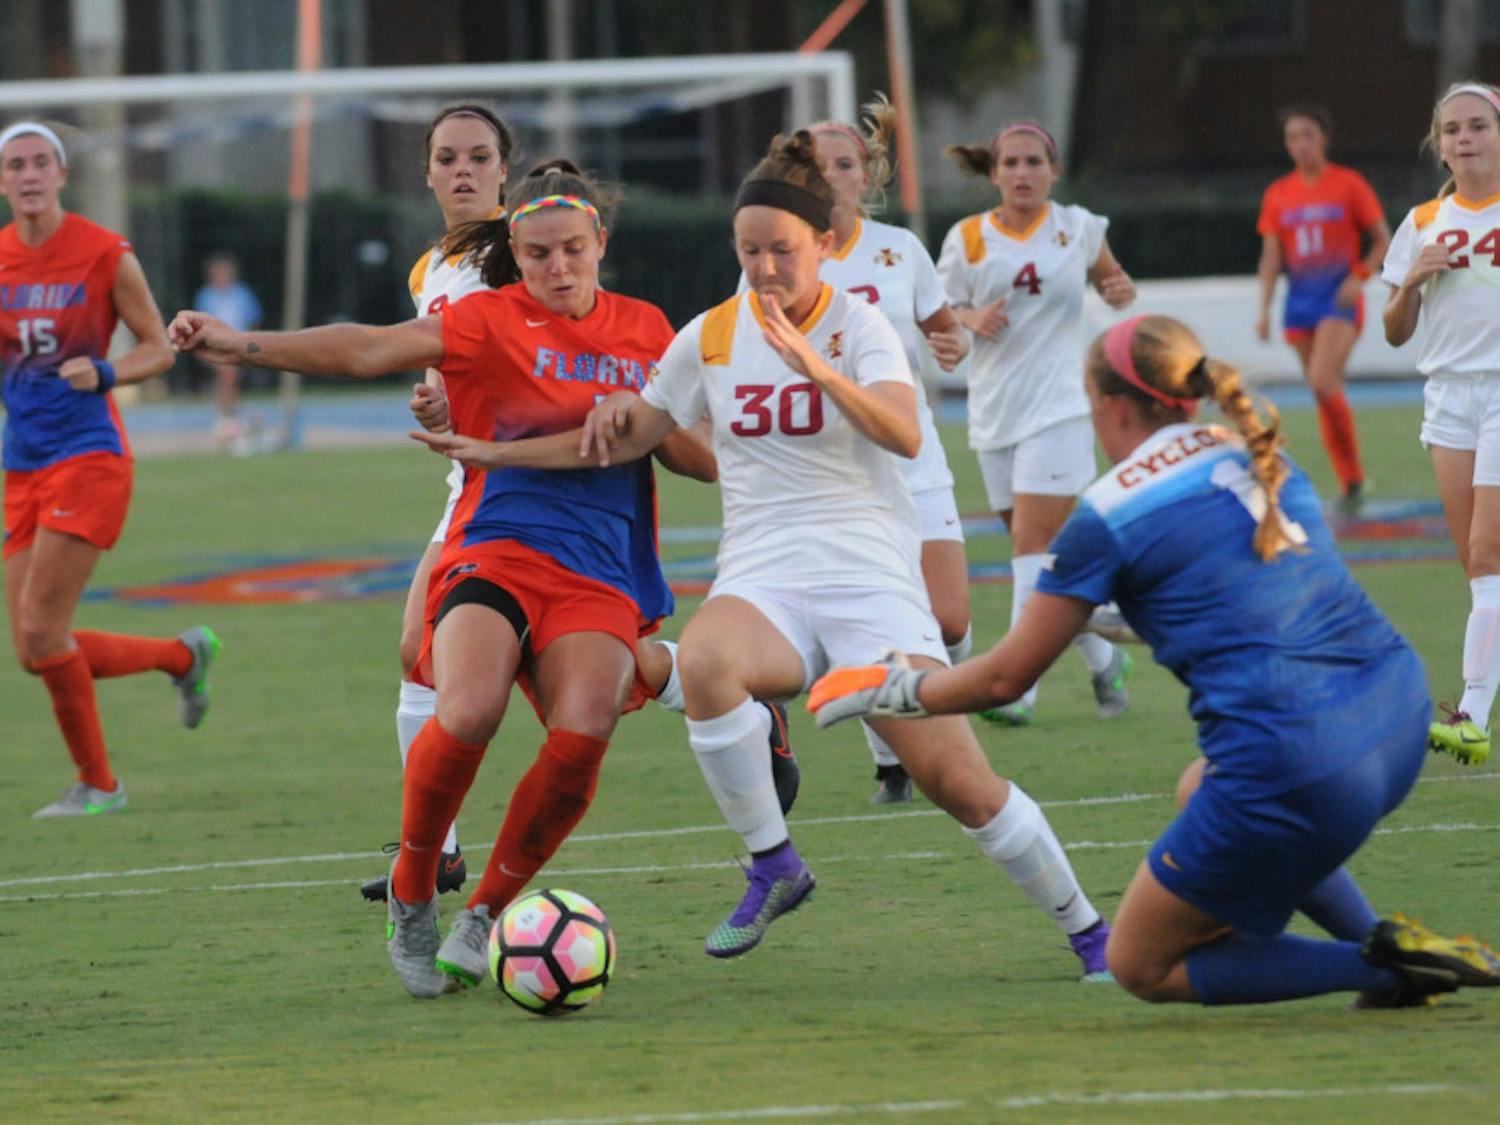 UF forward Savannah Jordan fights for possession during Florida's 5-2 win against Iowa State on Aug. 19, 2016, at James G. Pressly Stadium.